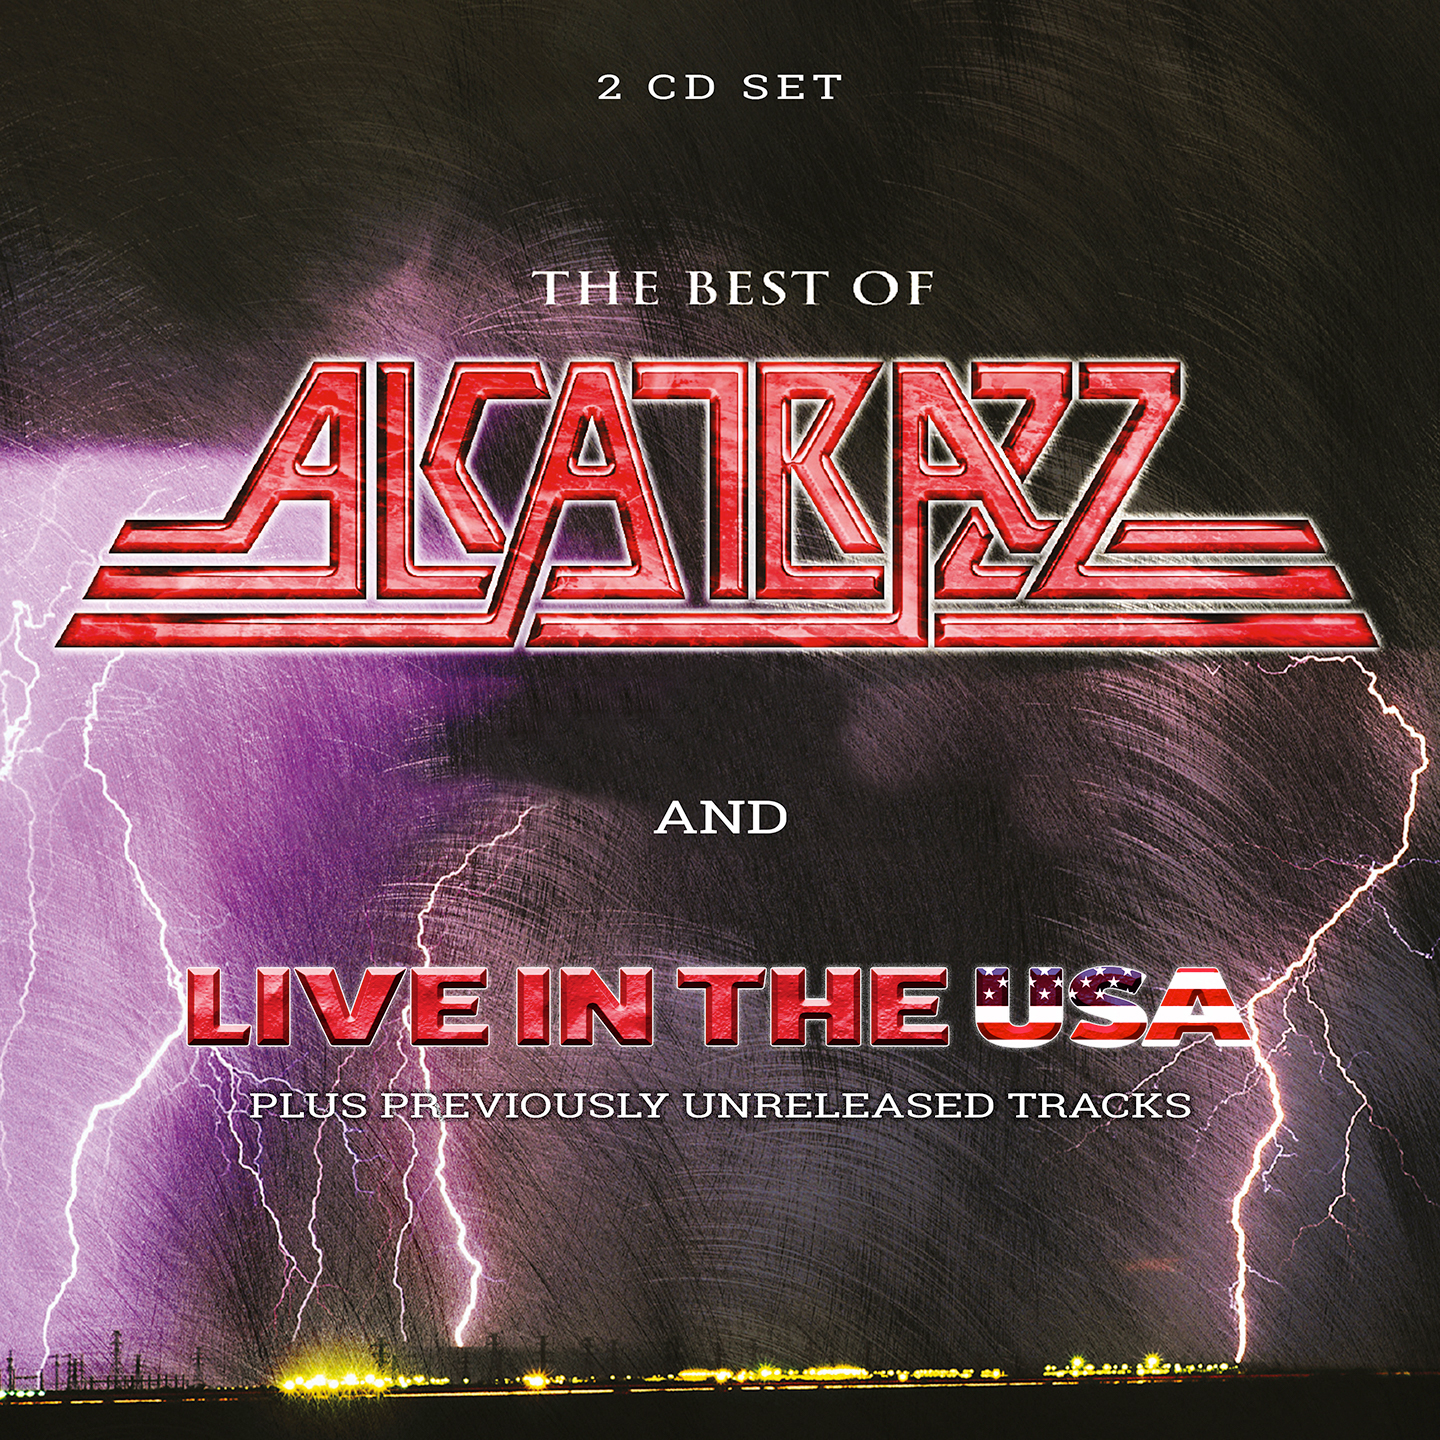 Alcatrazz - The Best of/Live In The USA - 2xCD